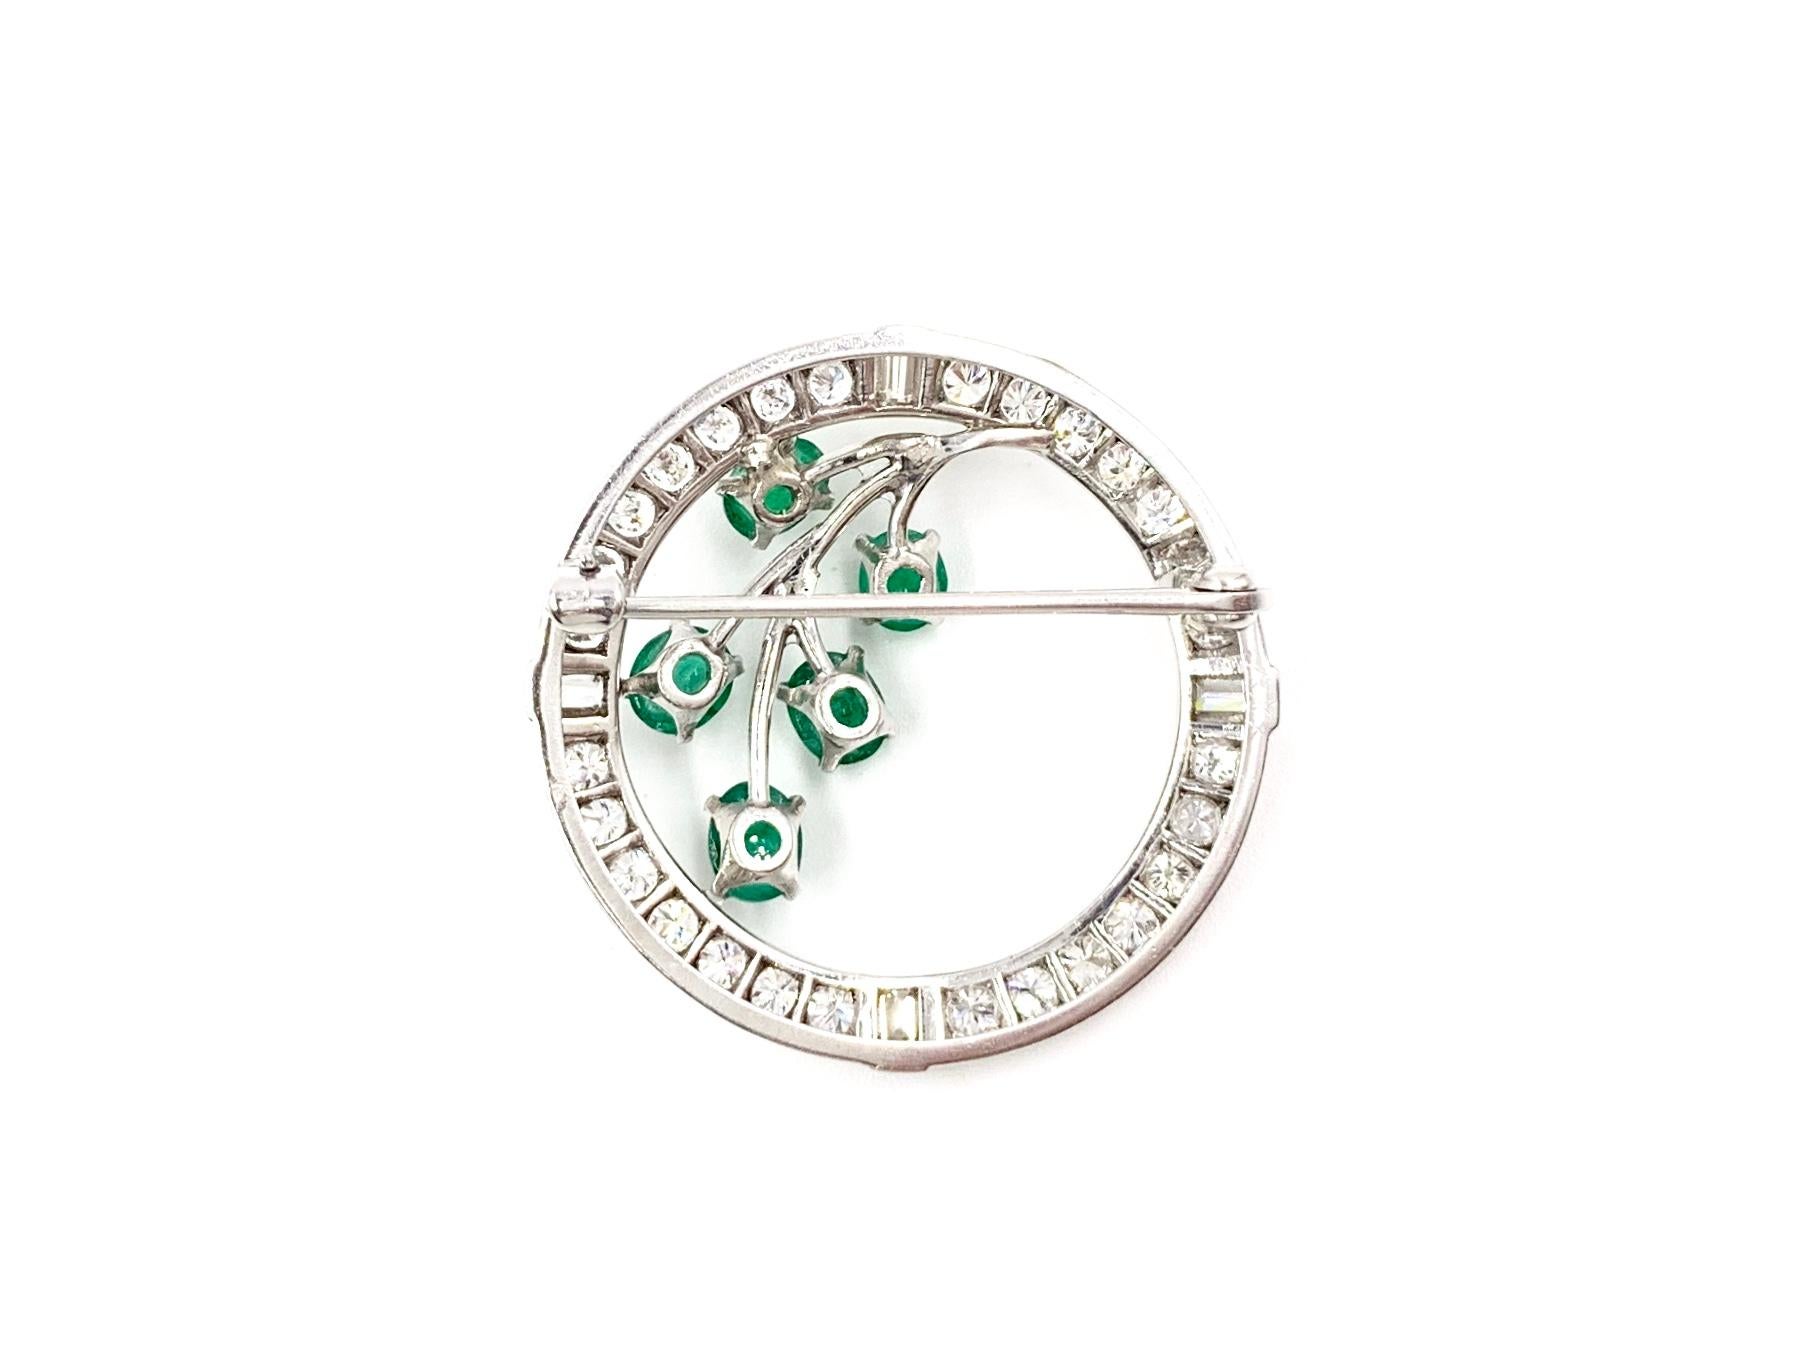 White Gold Diamond and Emerald Garland Style Brooch In Good Condition For Sale In Pikesville, MD